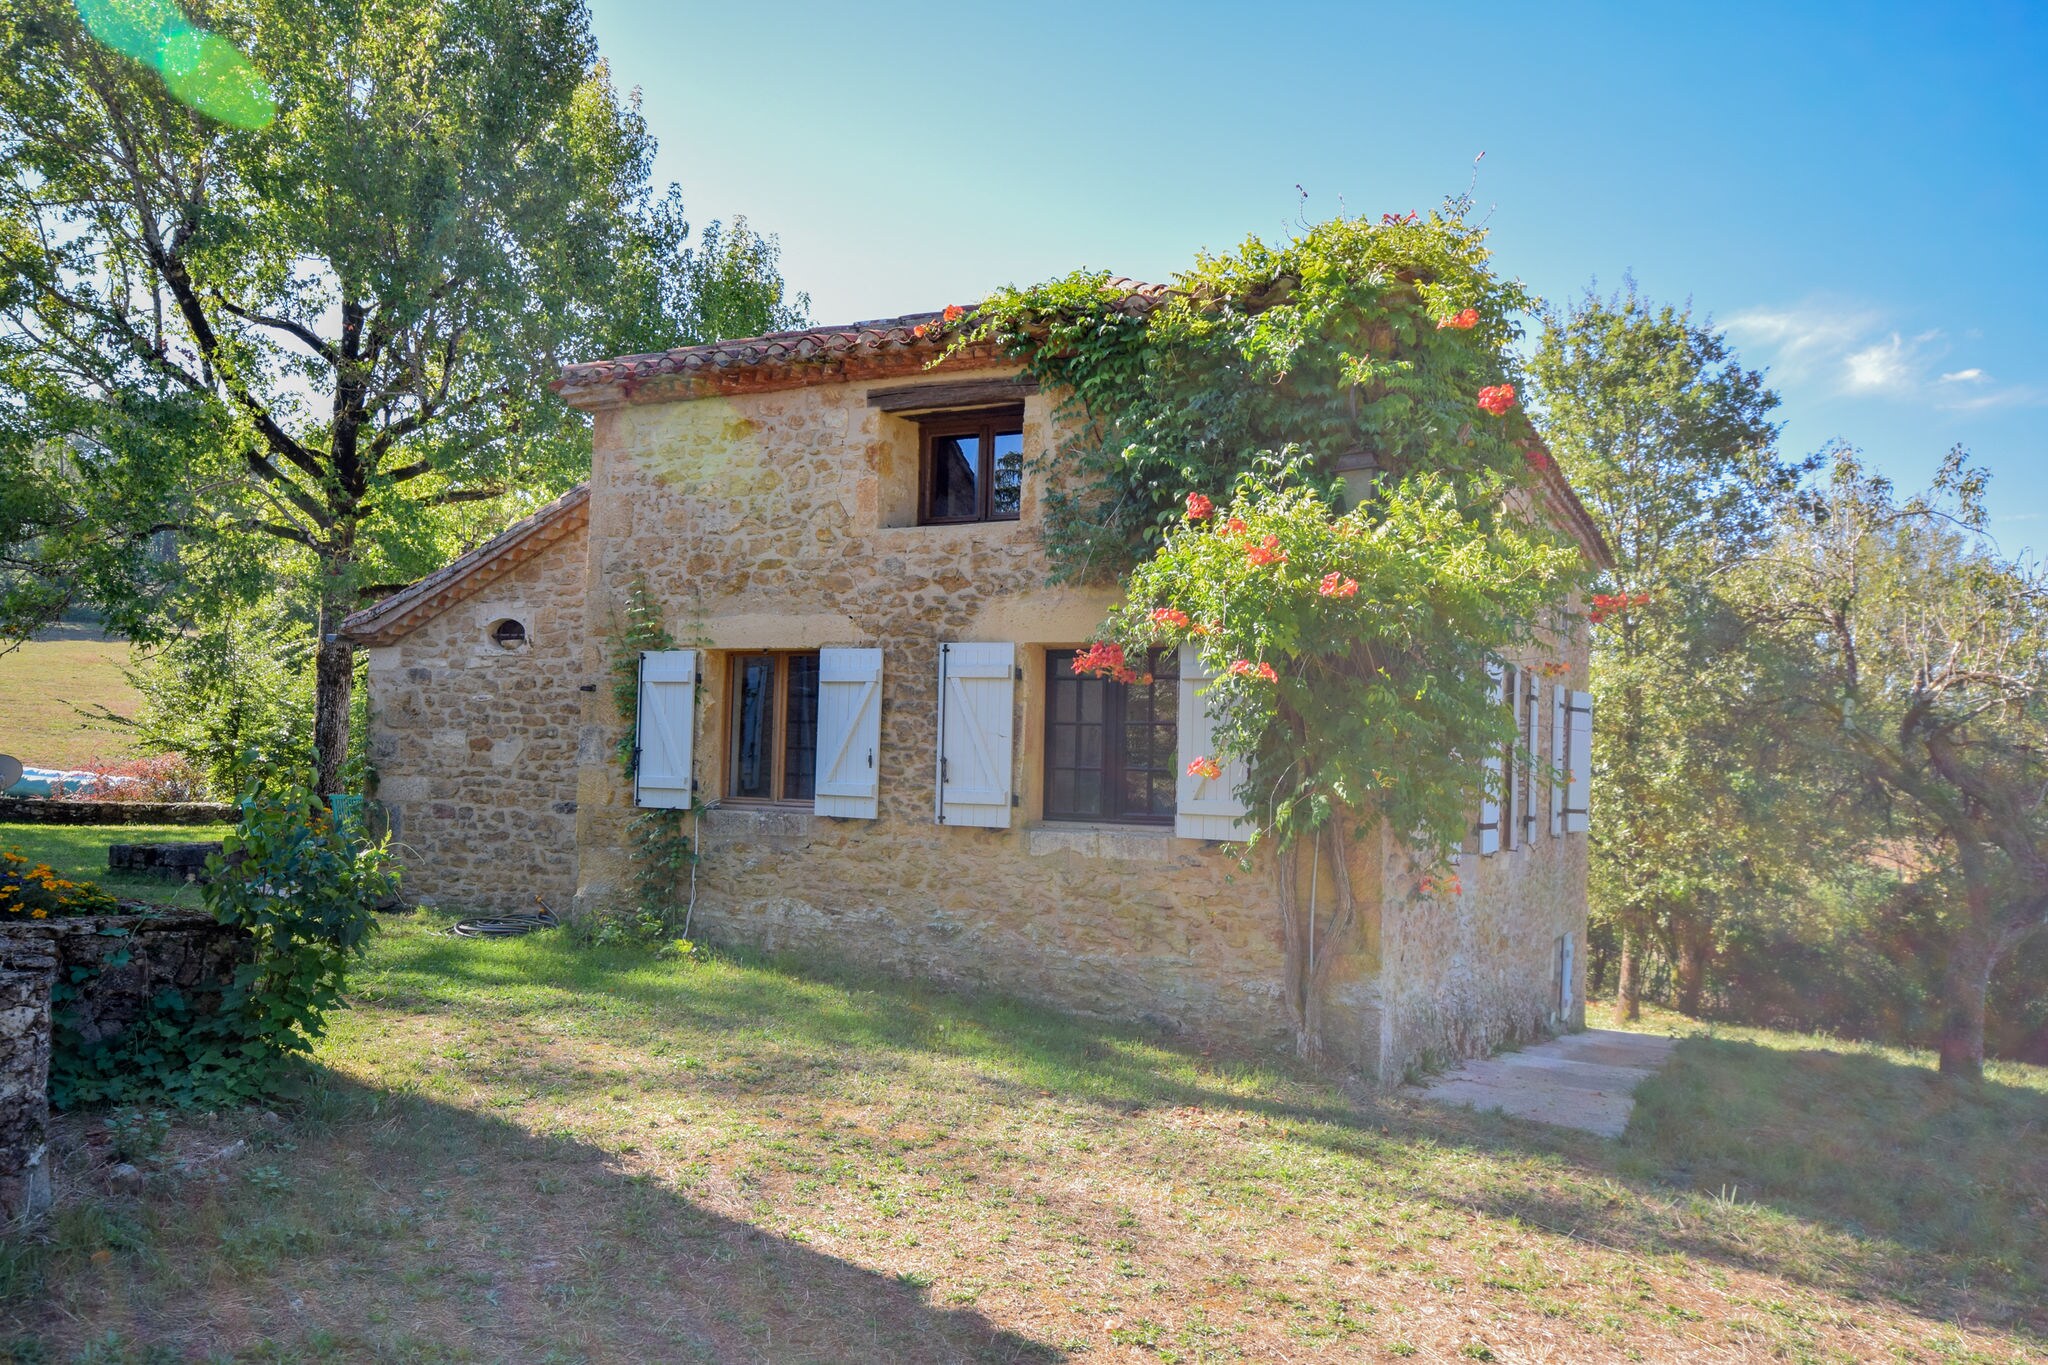 Dordogne Quaint Quiet Country Farmhouse, away from it al, with everything, close enough!